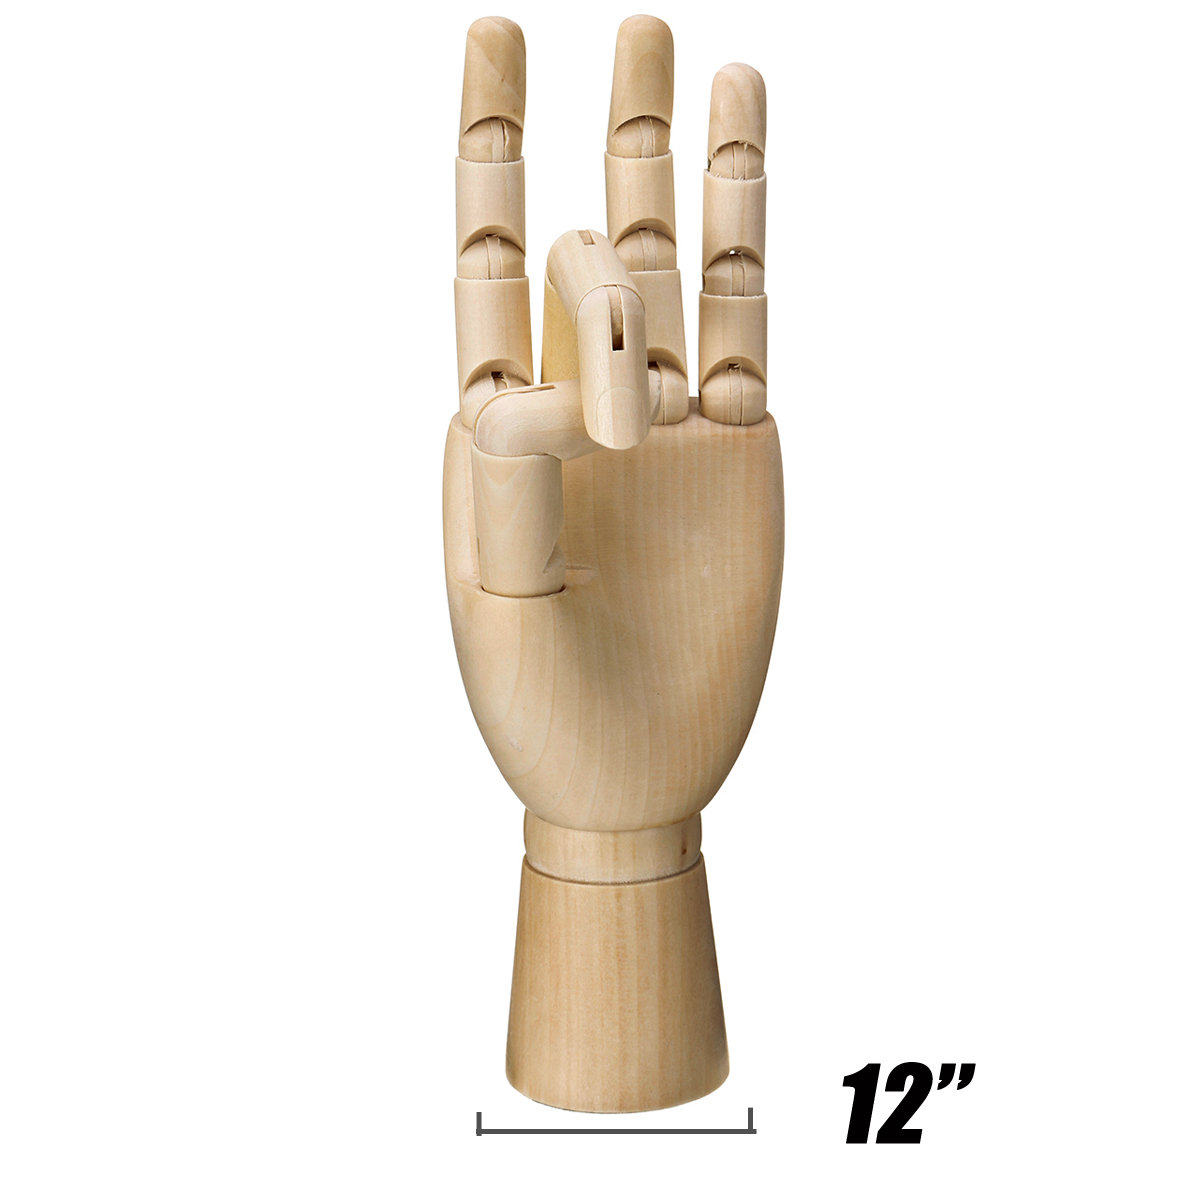 781012-Inch-Wooden-Hand-Body-Artist-Medical-Model-Flexible-Jointed-Wood-Sculpture-DIY-Education-1322443-2